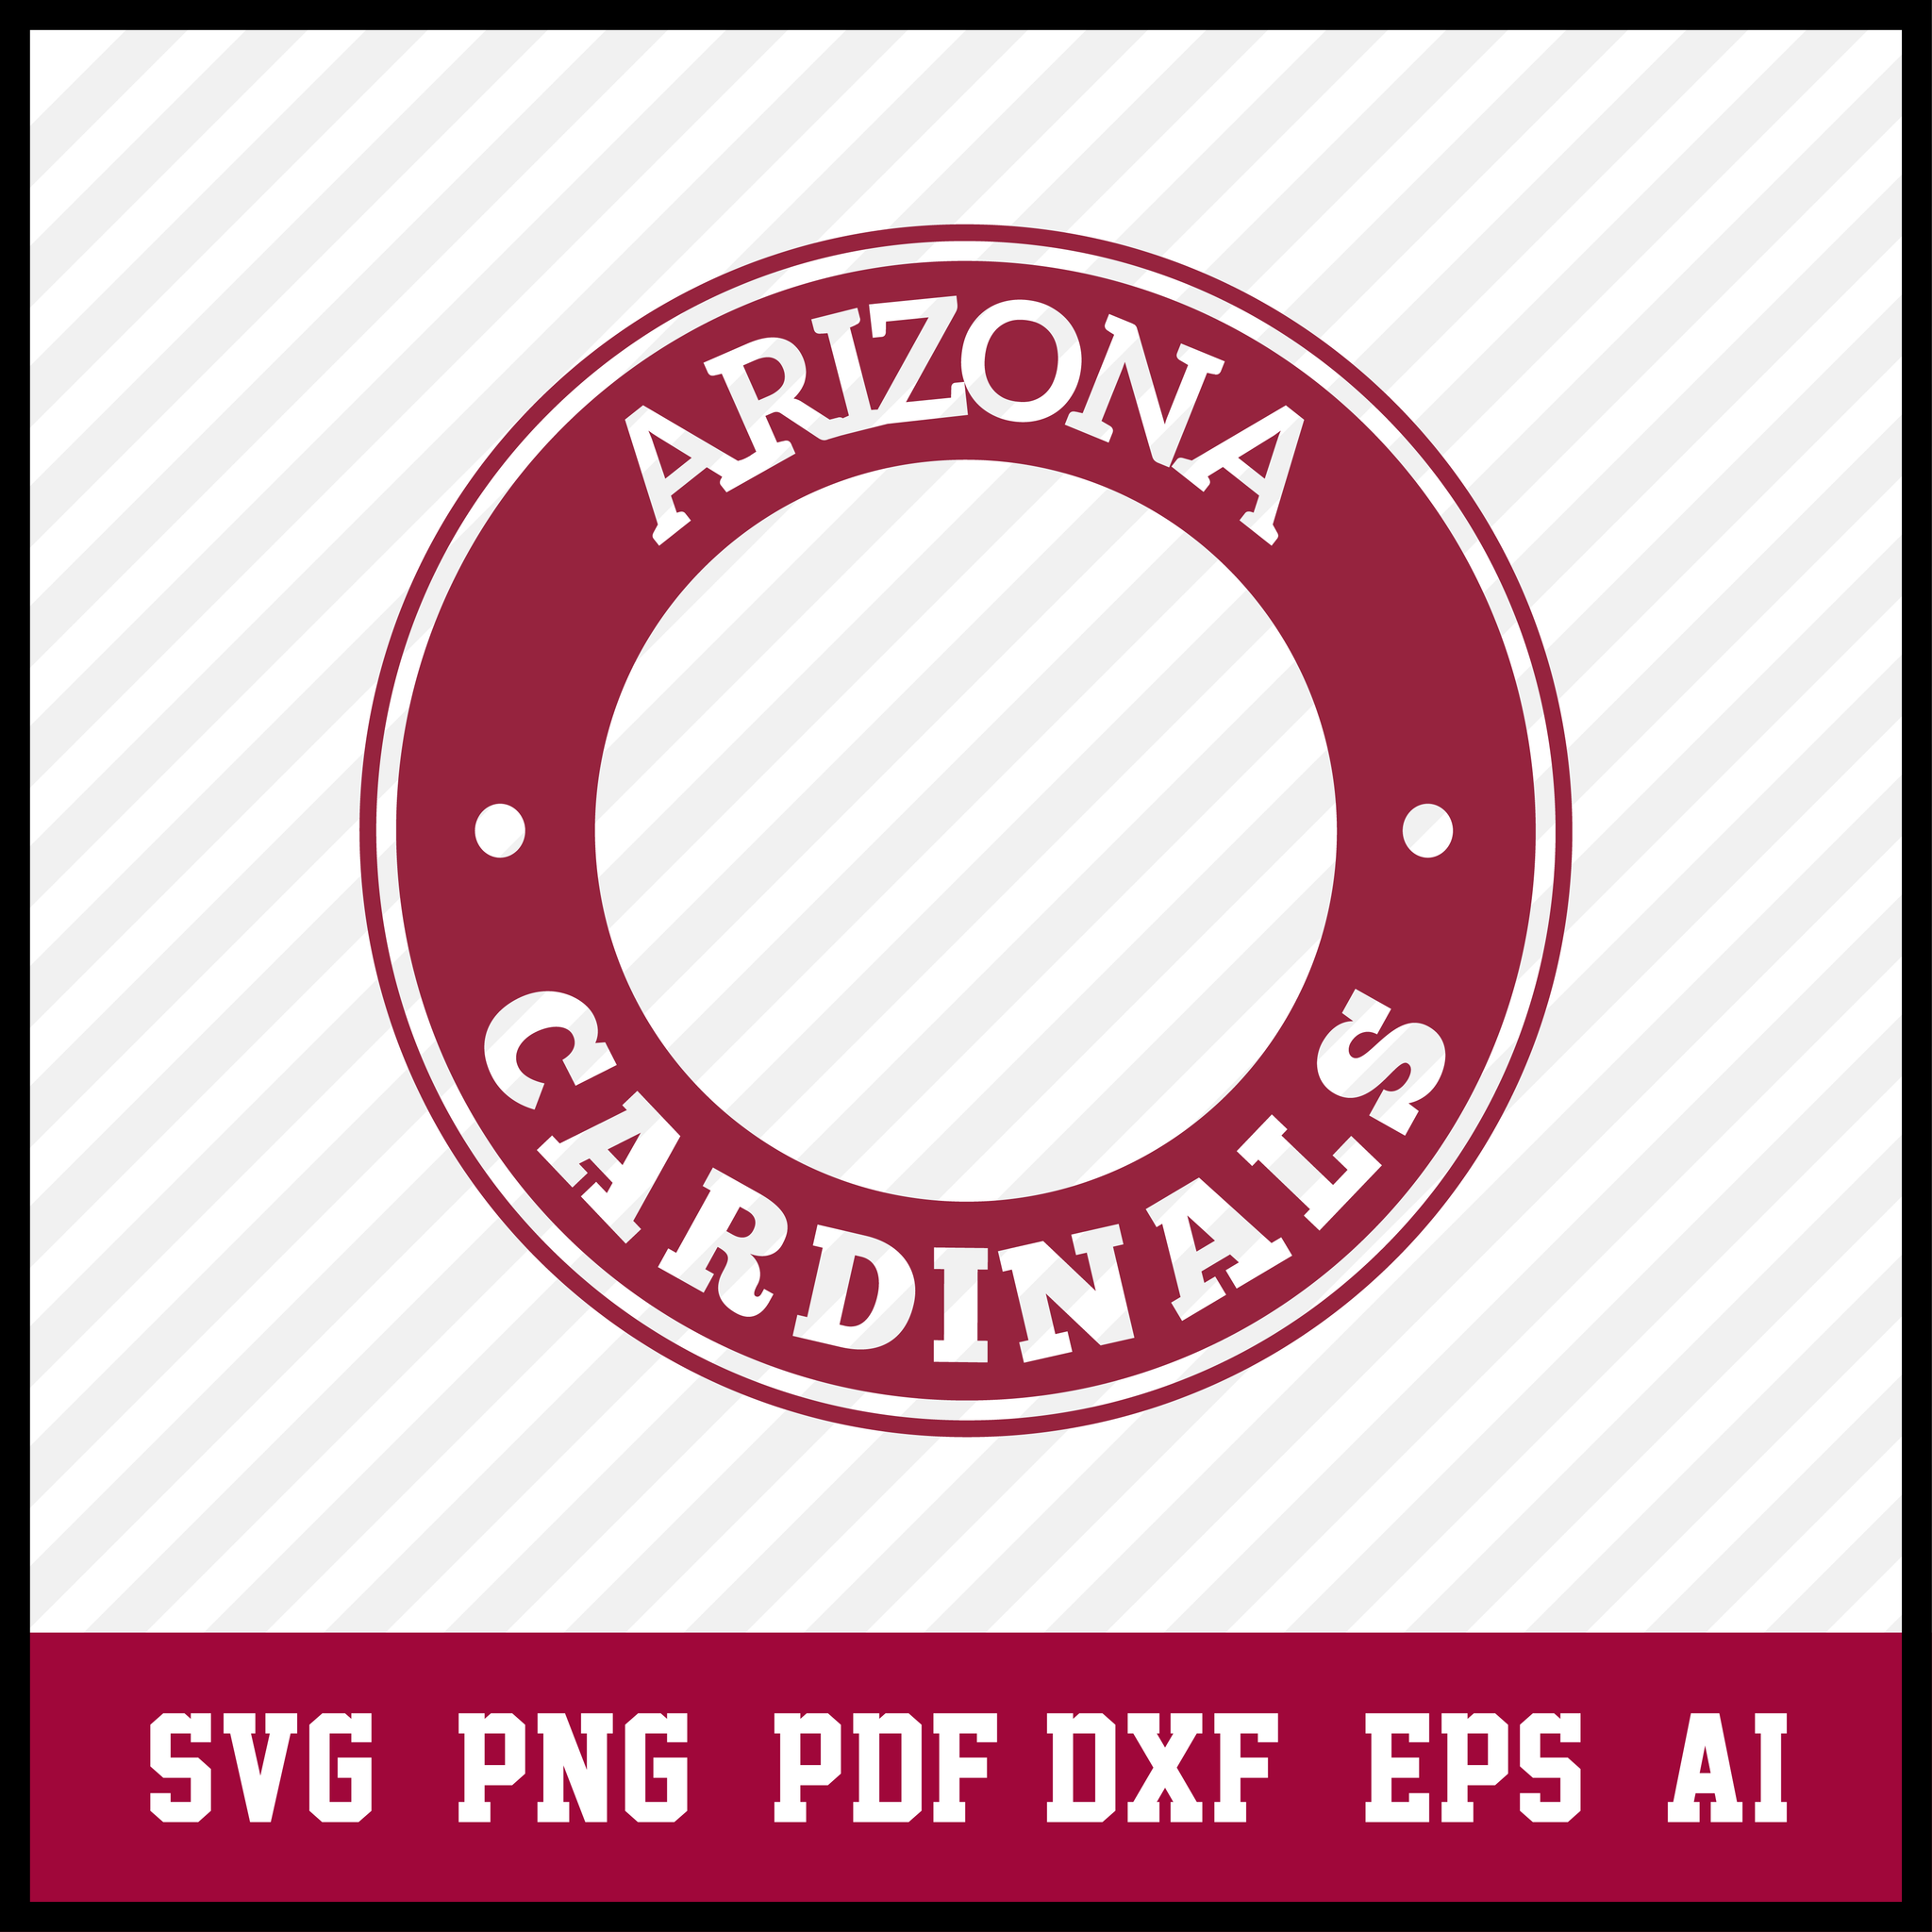 Arizona cardinals Starbucks Cold Cup svg, Arizona Cardinals Logo, Cardinals Svg, Cardinals Clipart, Football SVG, Svg File for cricut, Nfl Svg  • INSTANT Digital DOWNLOAD includes: 1 Zip and the following file formats: SVG, DXF, PNG, AI, PDF